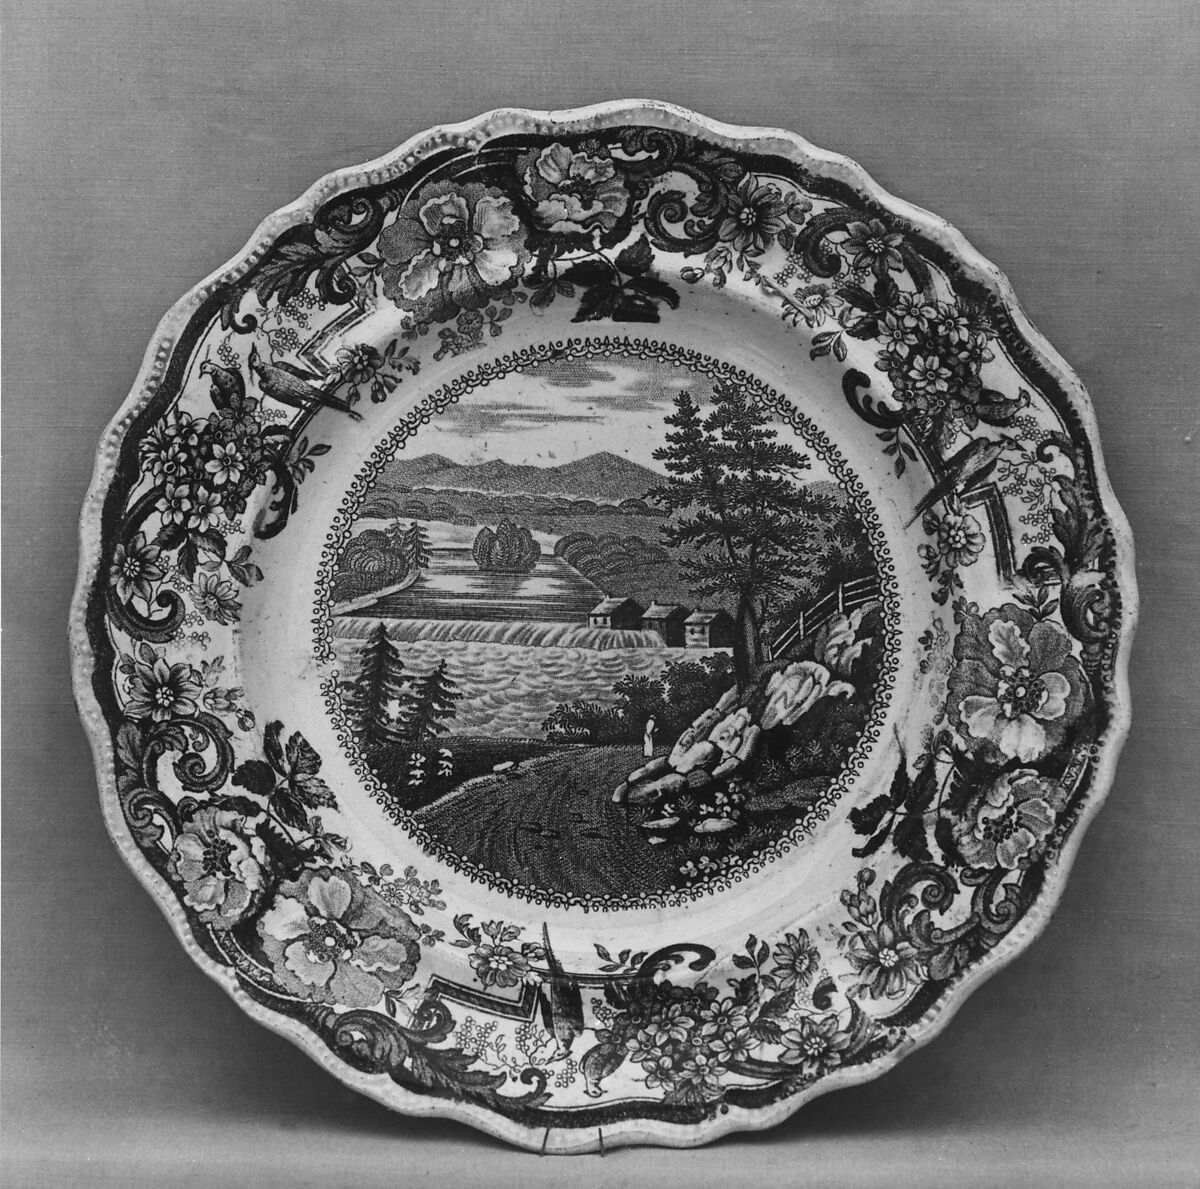 Plate, James and Ralph Clews (British, Cobridge, Stoke-on-Trent, active ca. 1818–36), Earthenware, transfer-printed, British (American market) 